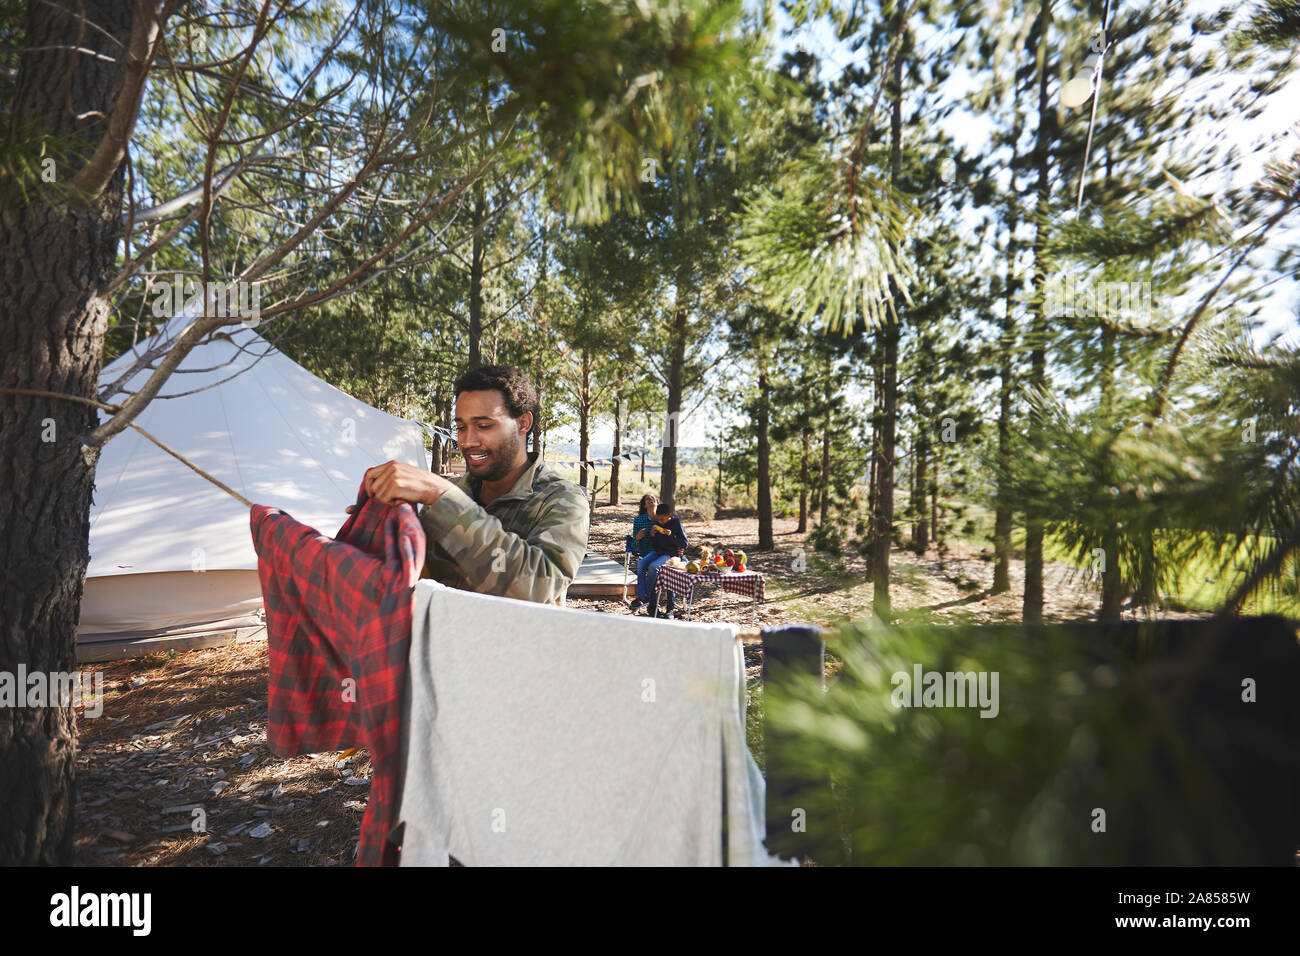 Man hanging laundry on clothesline at campsite in woods Stock Photo